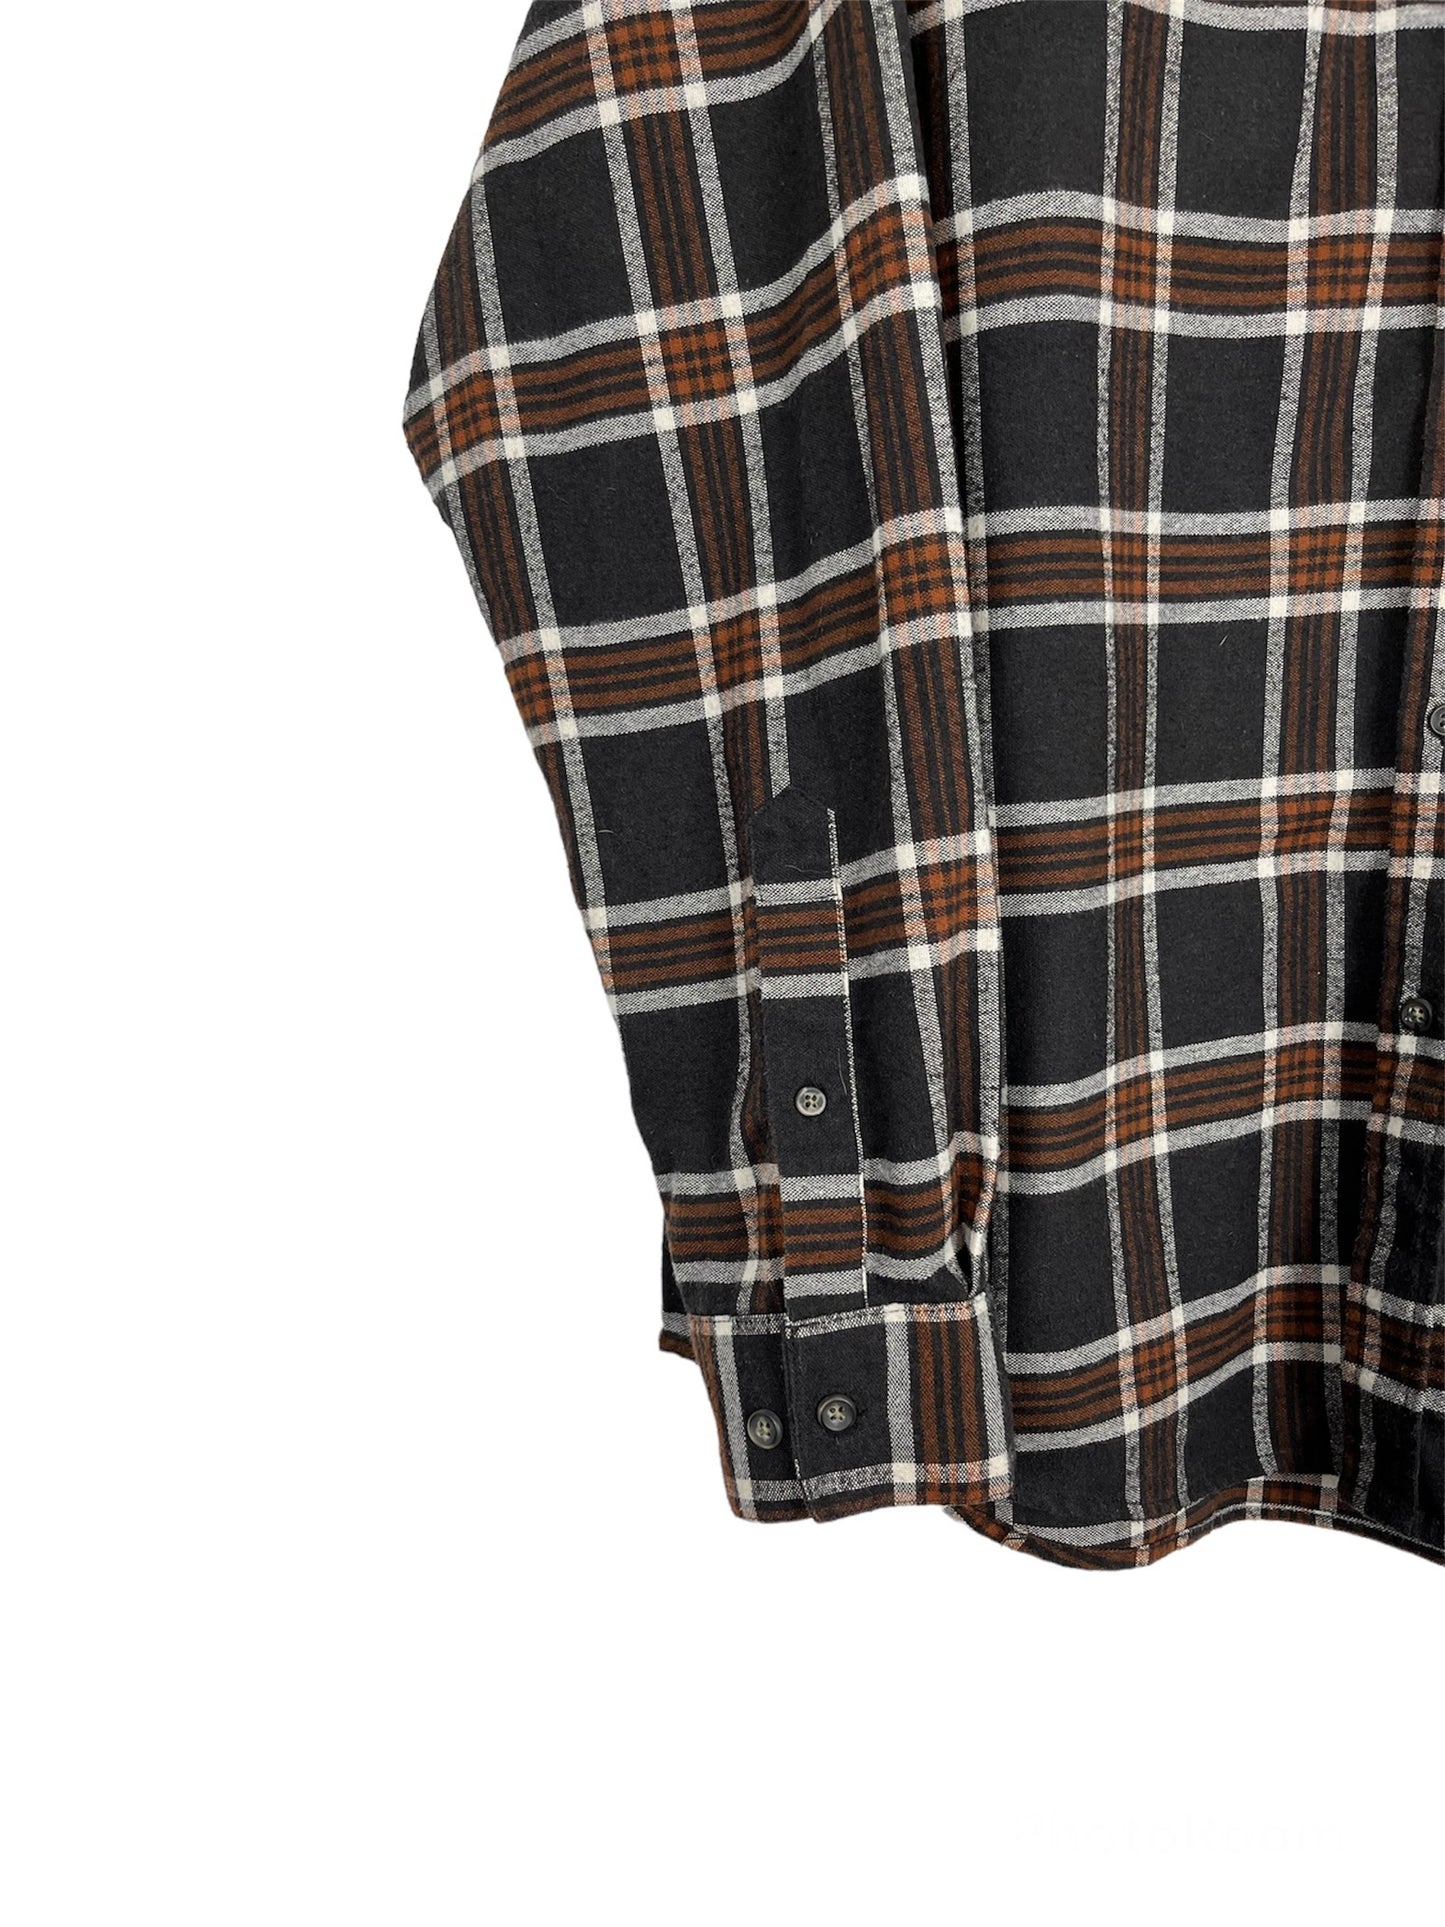 Craghoppers Flannel Shirt - Large